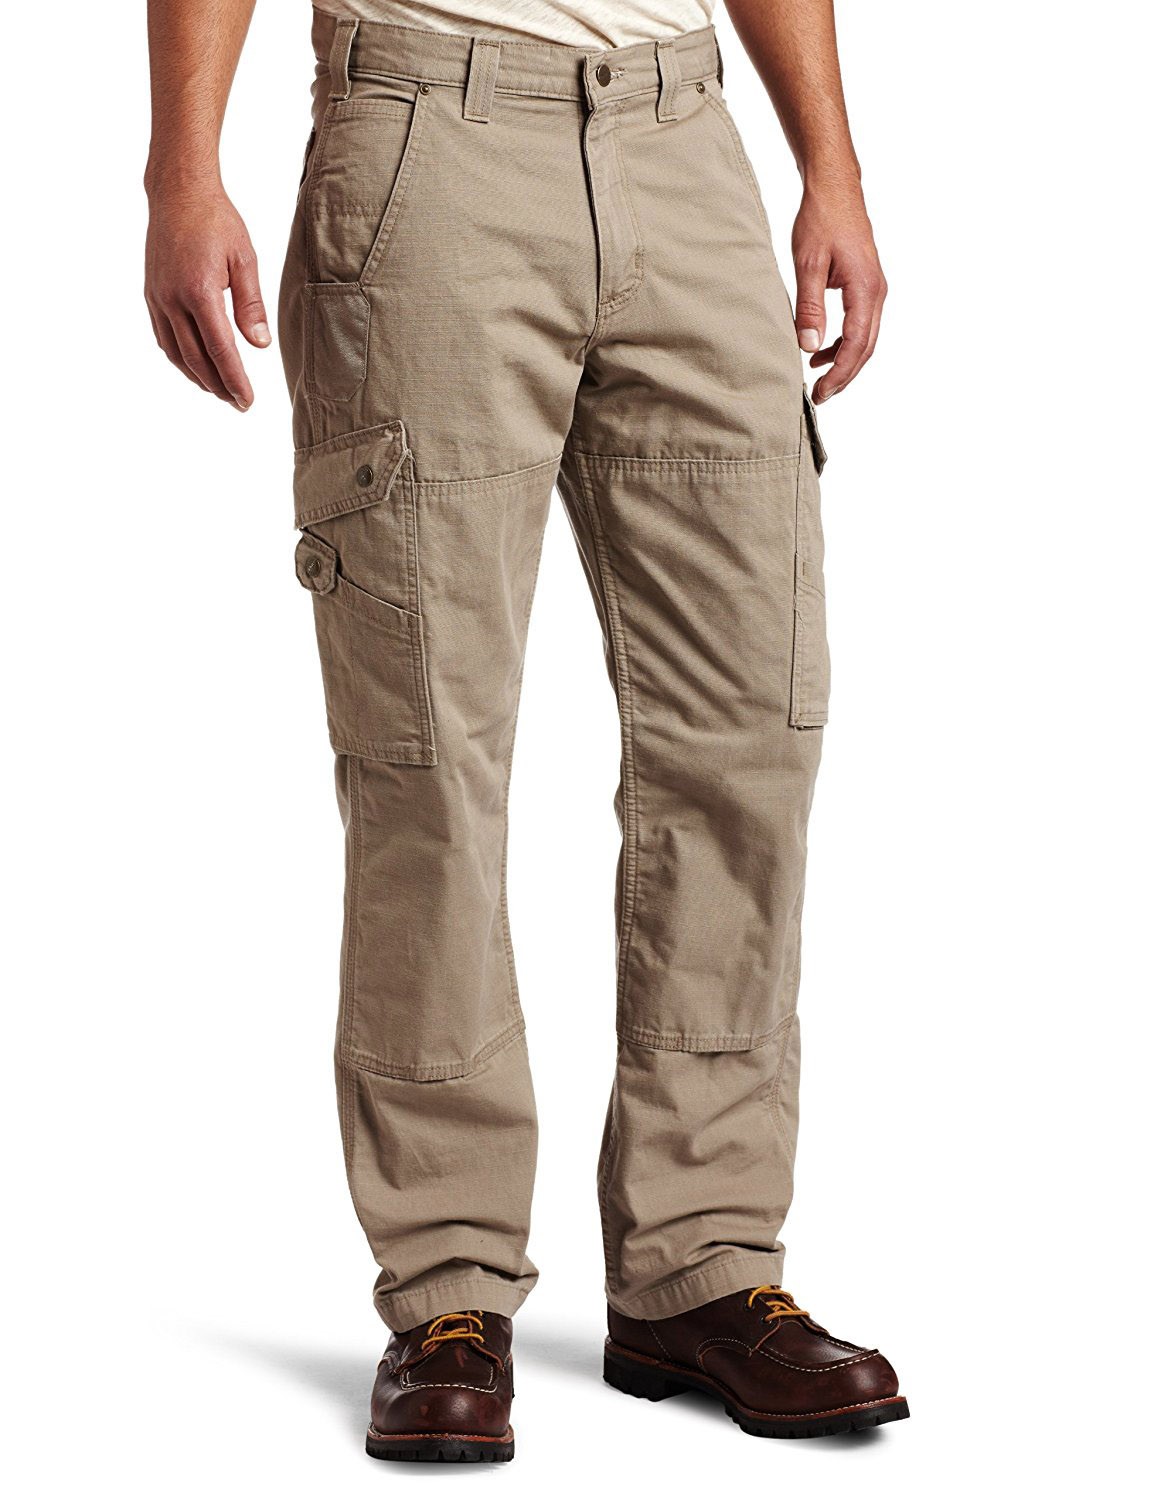 best jeans for construction workers